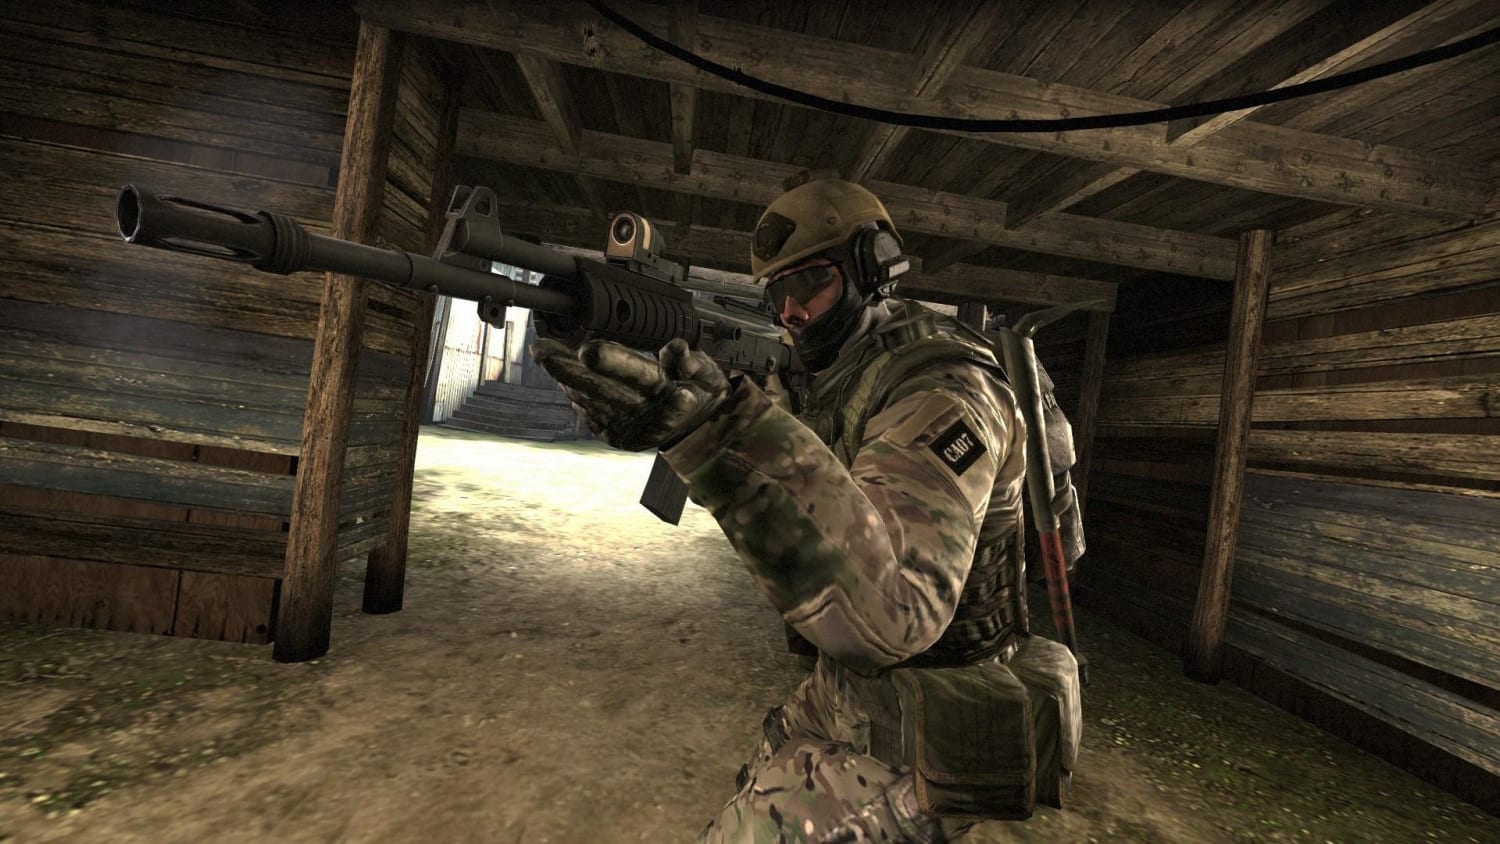 Counter-Strike GO tips - How to become a pro